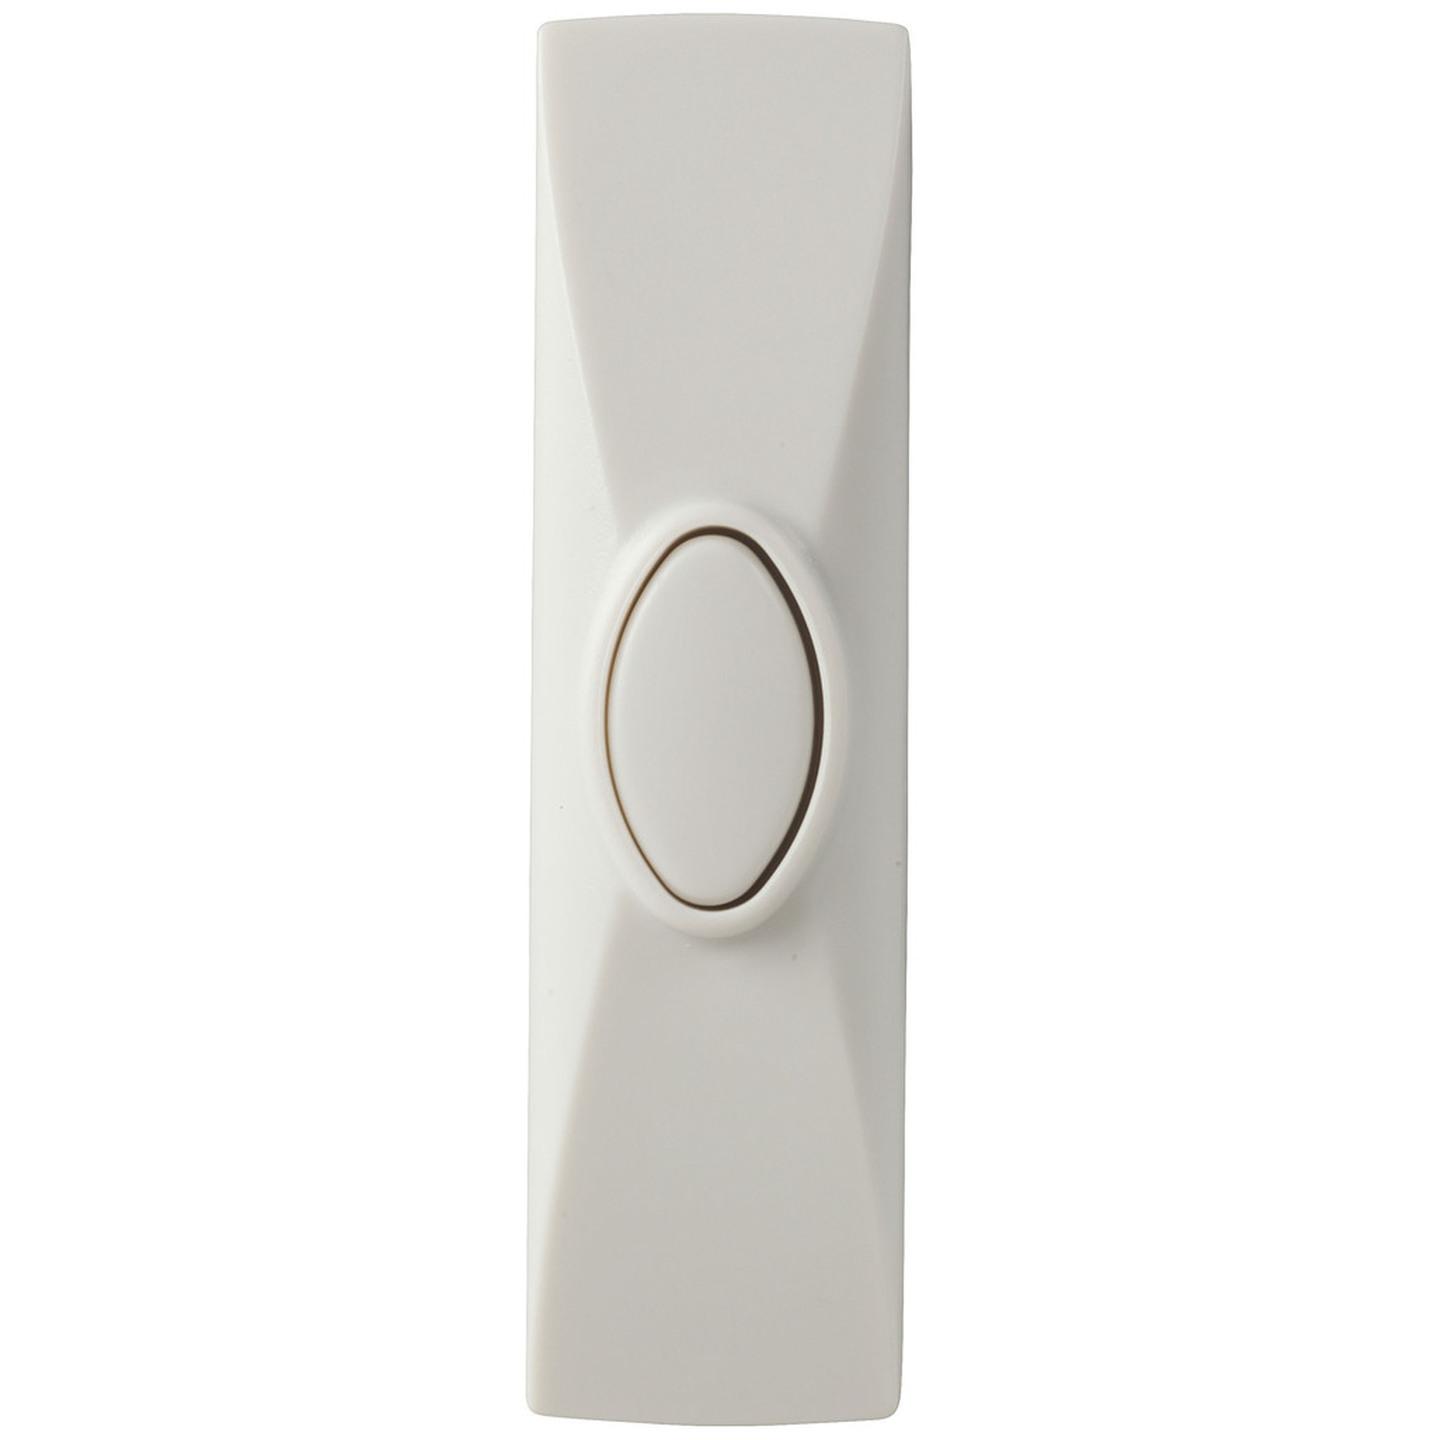 High Volume Wireless Door Bell with Strobe for the Hearing Impaired